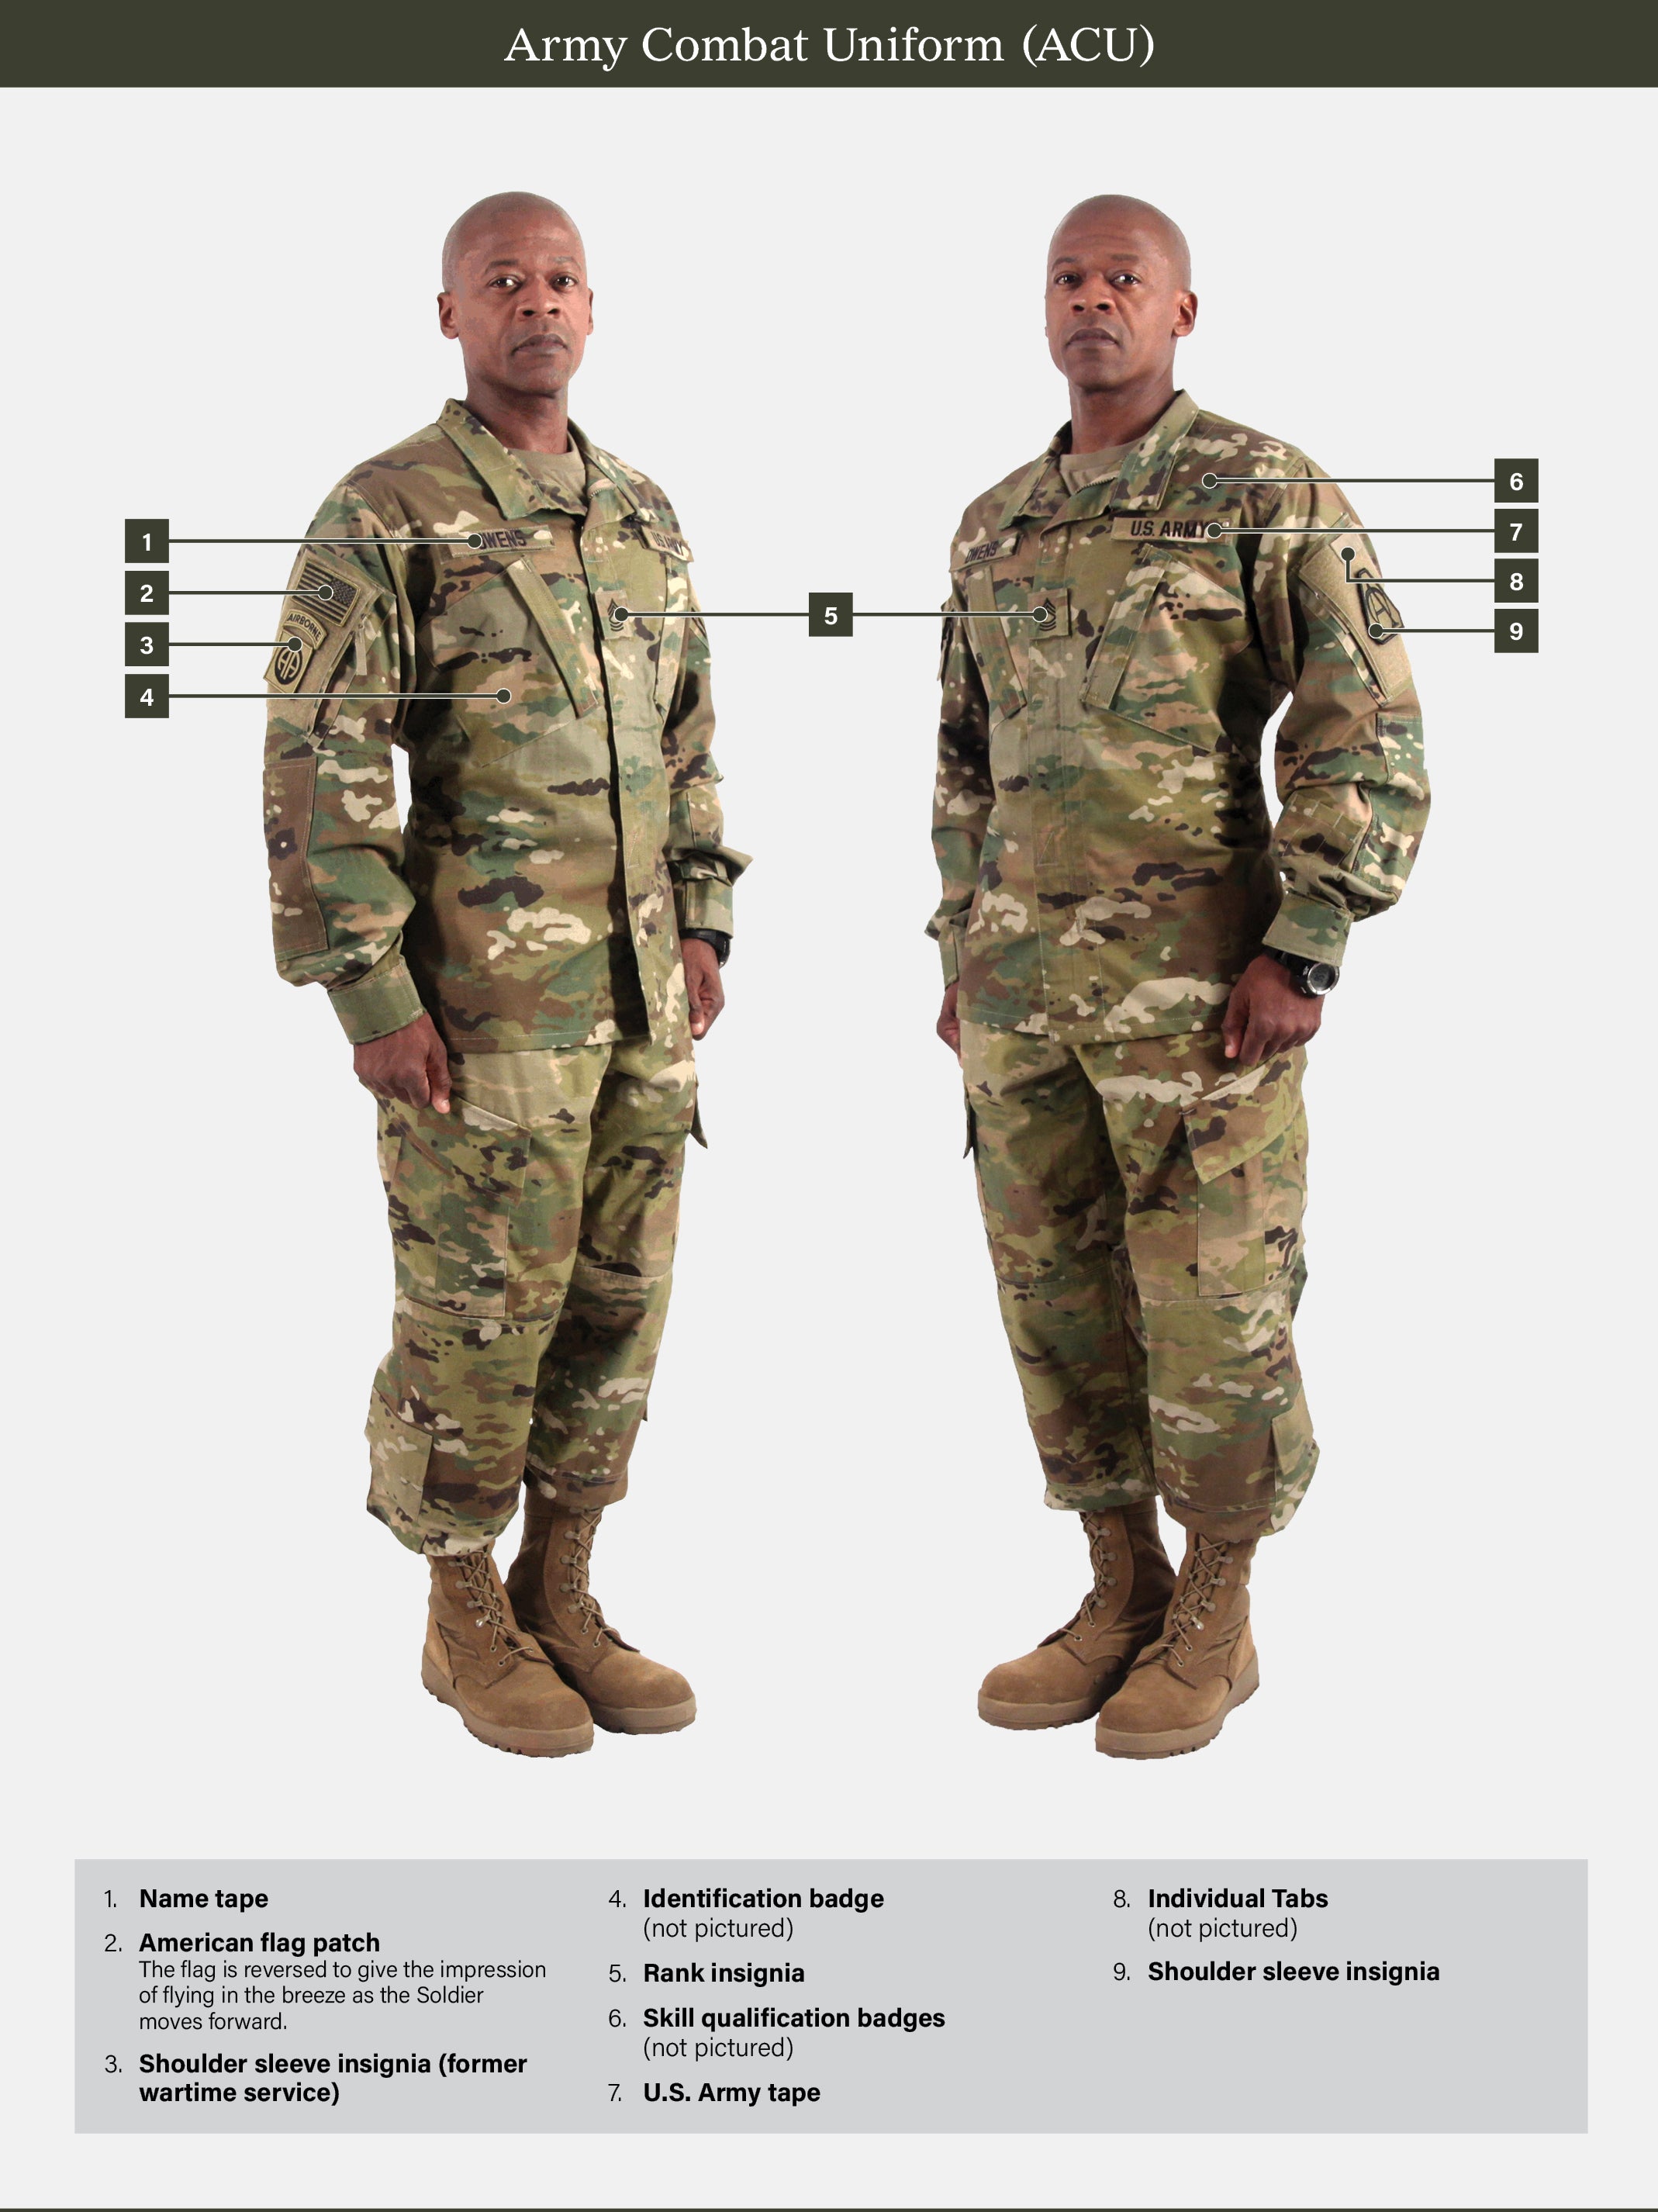 Profile of the United States Army: The Uniform